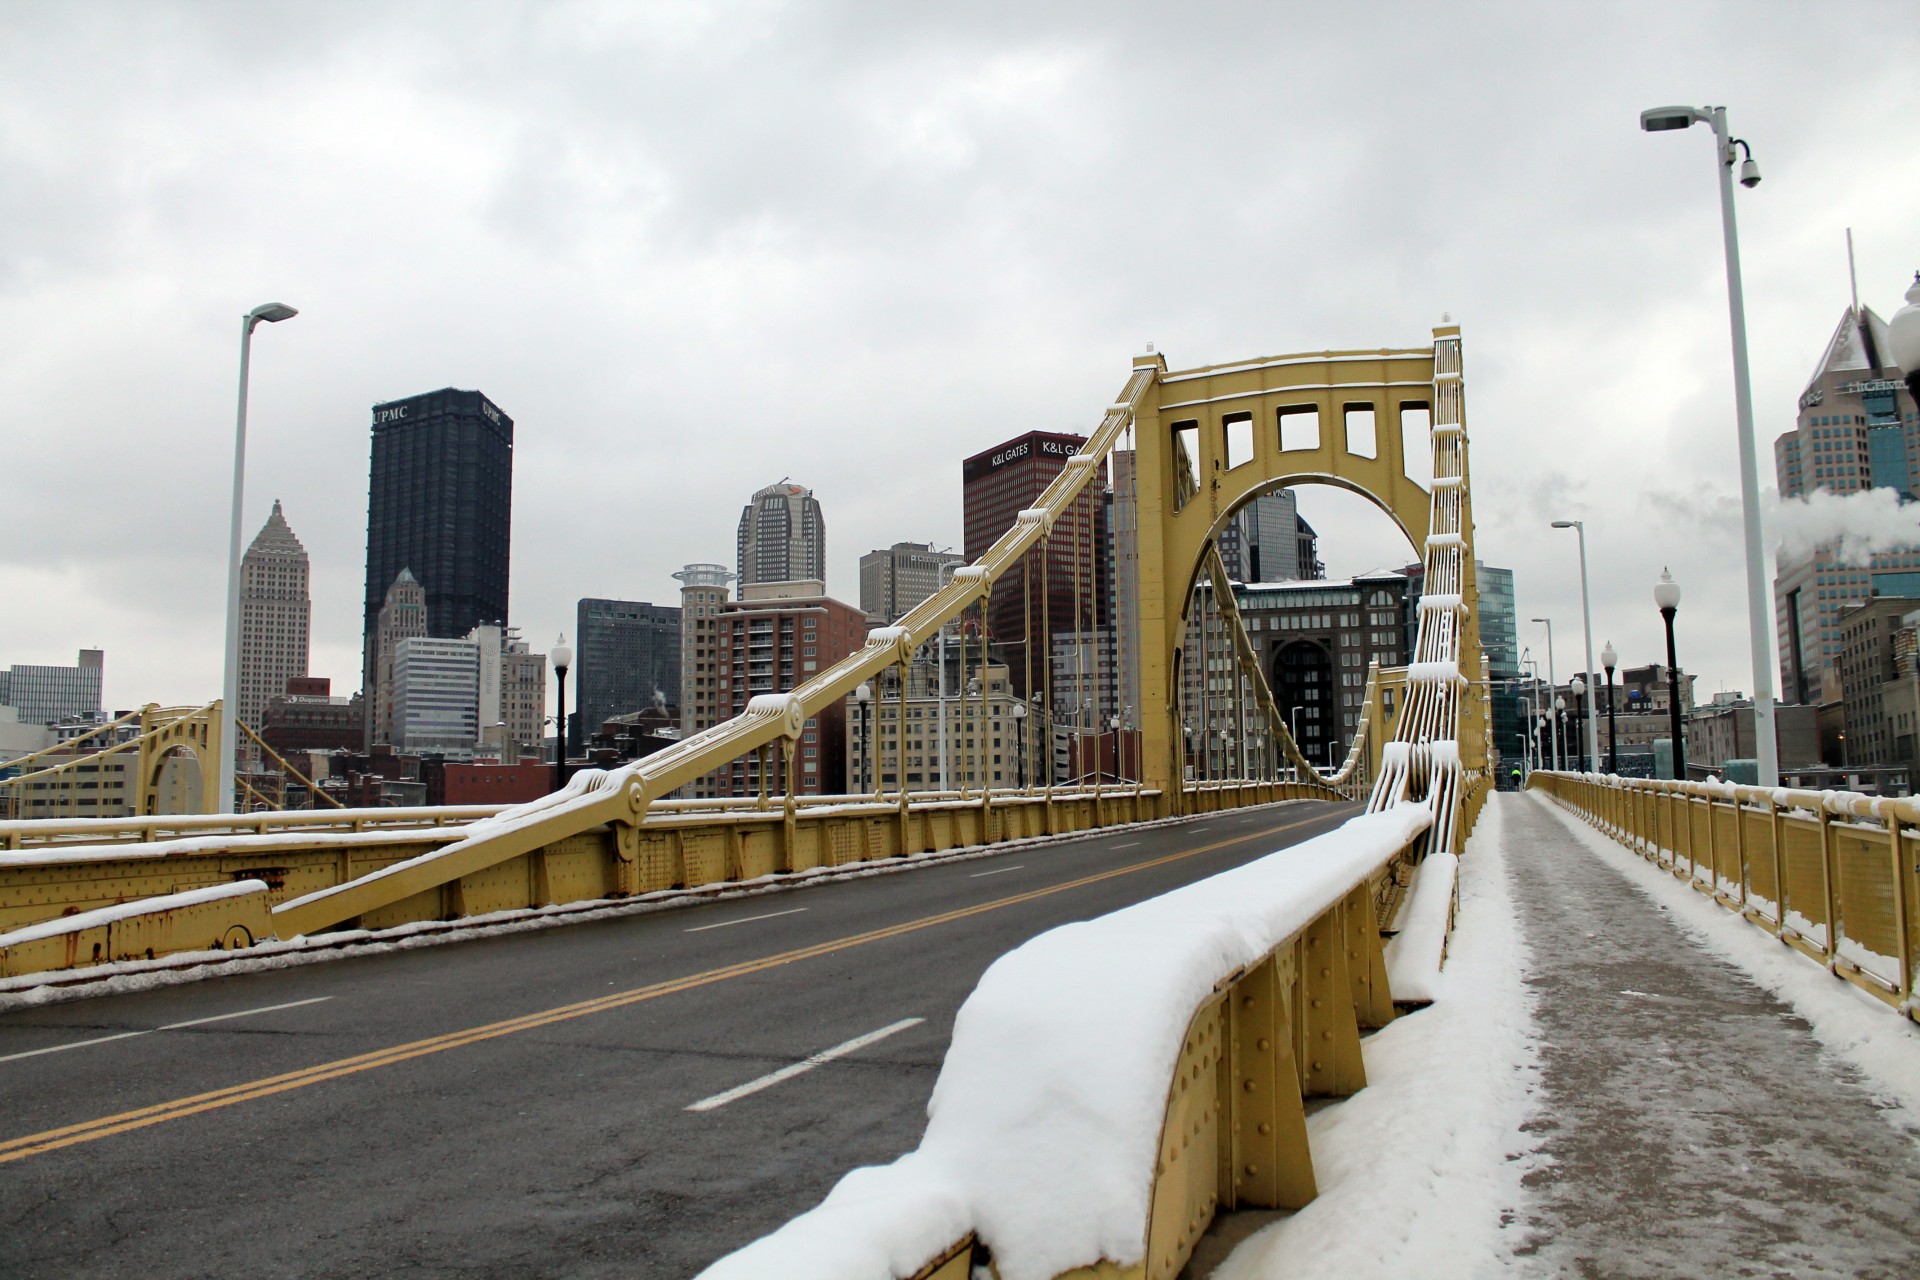 Snow Covered 6th Street Bridge with Pittsburgh Skyline - I really appreciate your premium download!